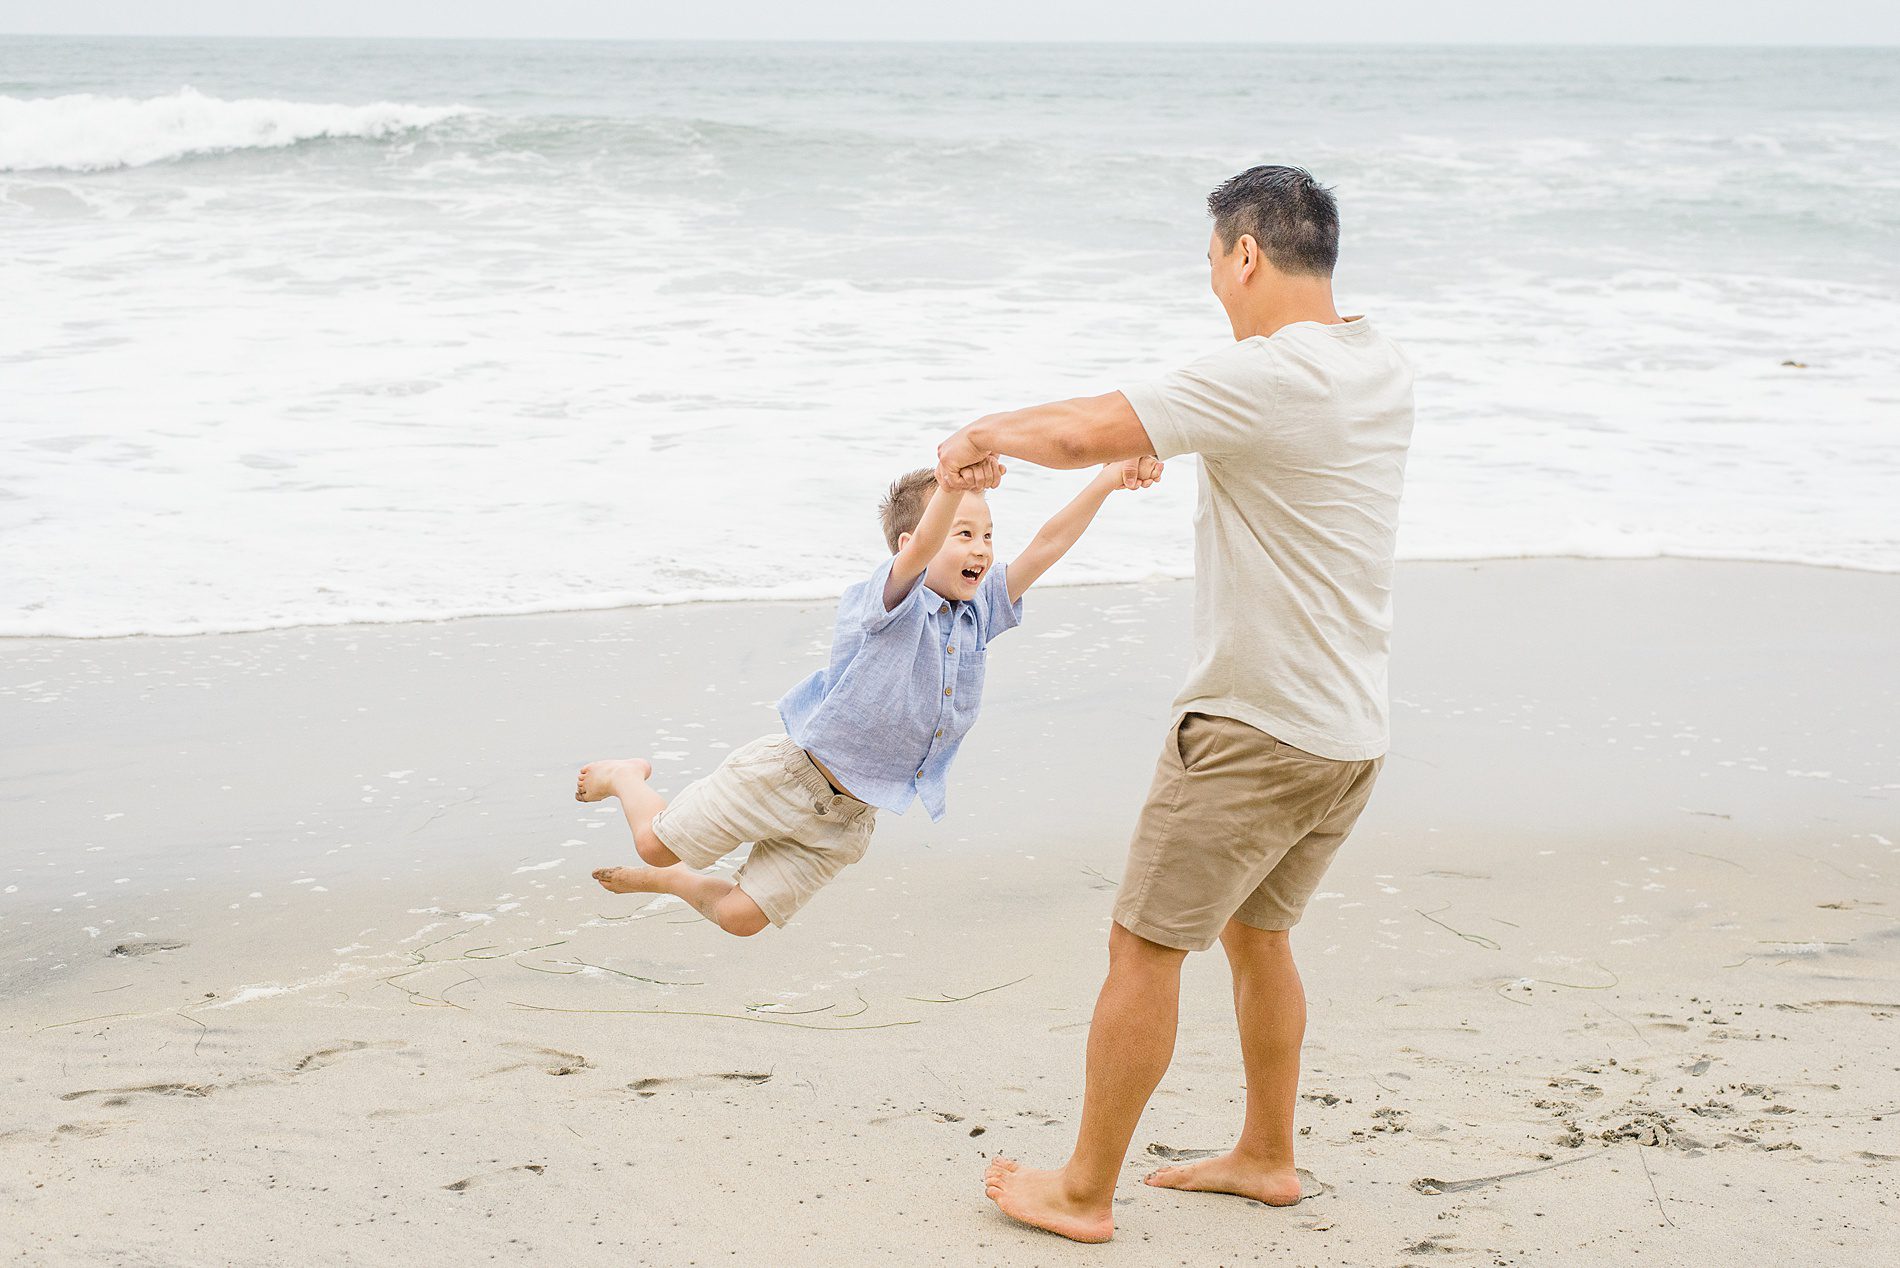 dad swings his son around on the beach 